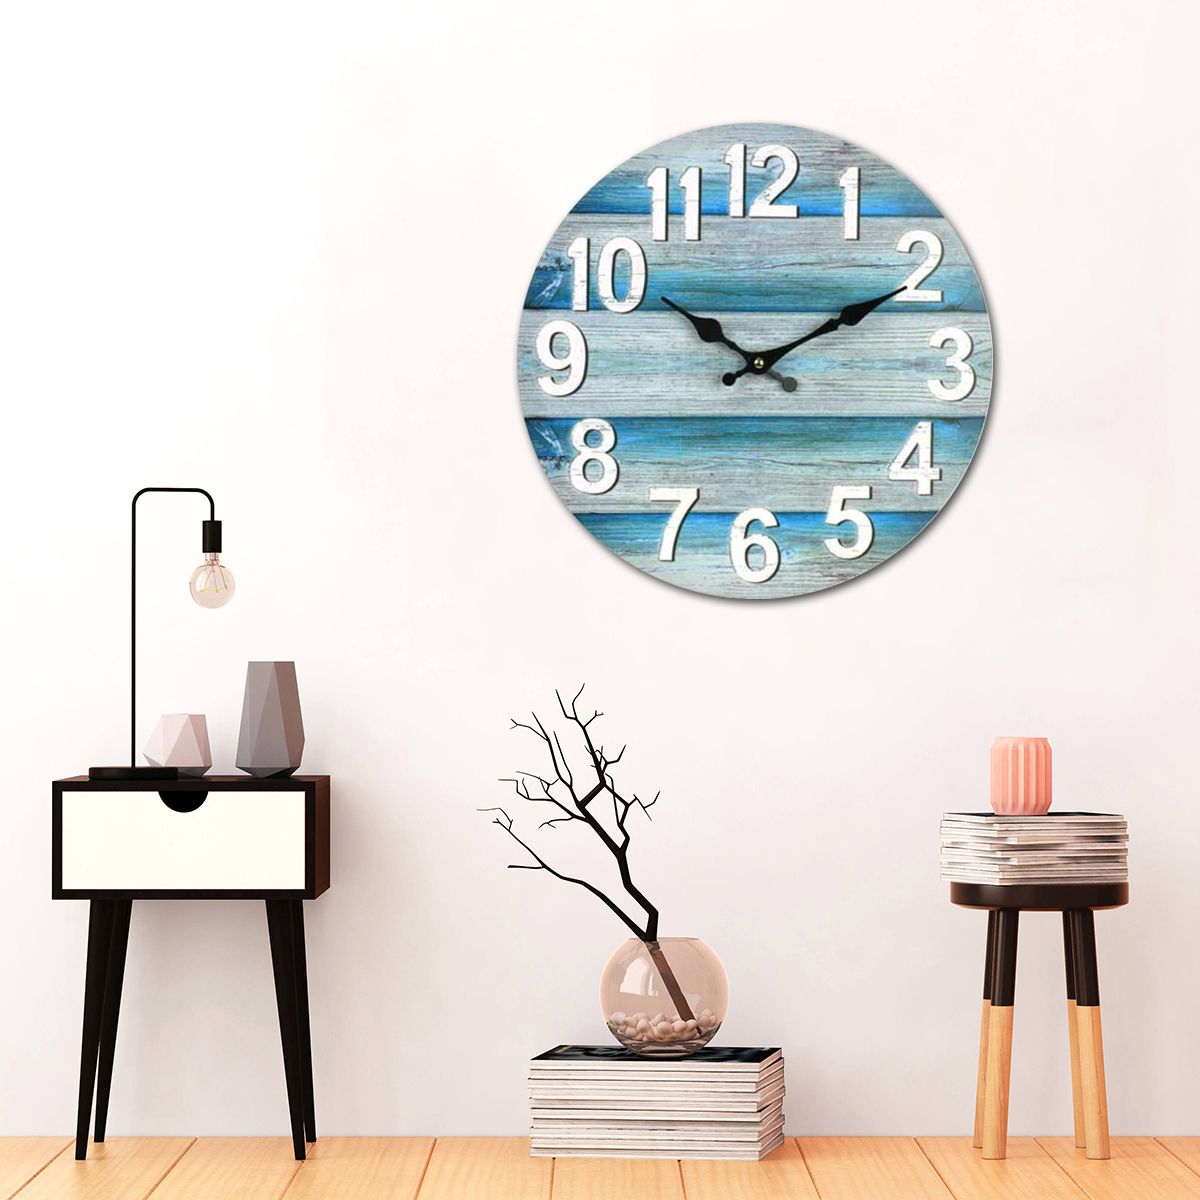 13-Inch-Wall-Clock-Round-Silent-Vintage-Beach-Ocean-Style-Clock-Home-Room-Decoration-1447233